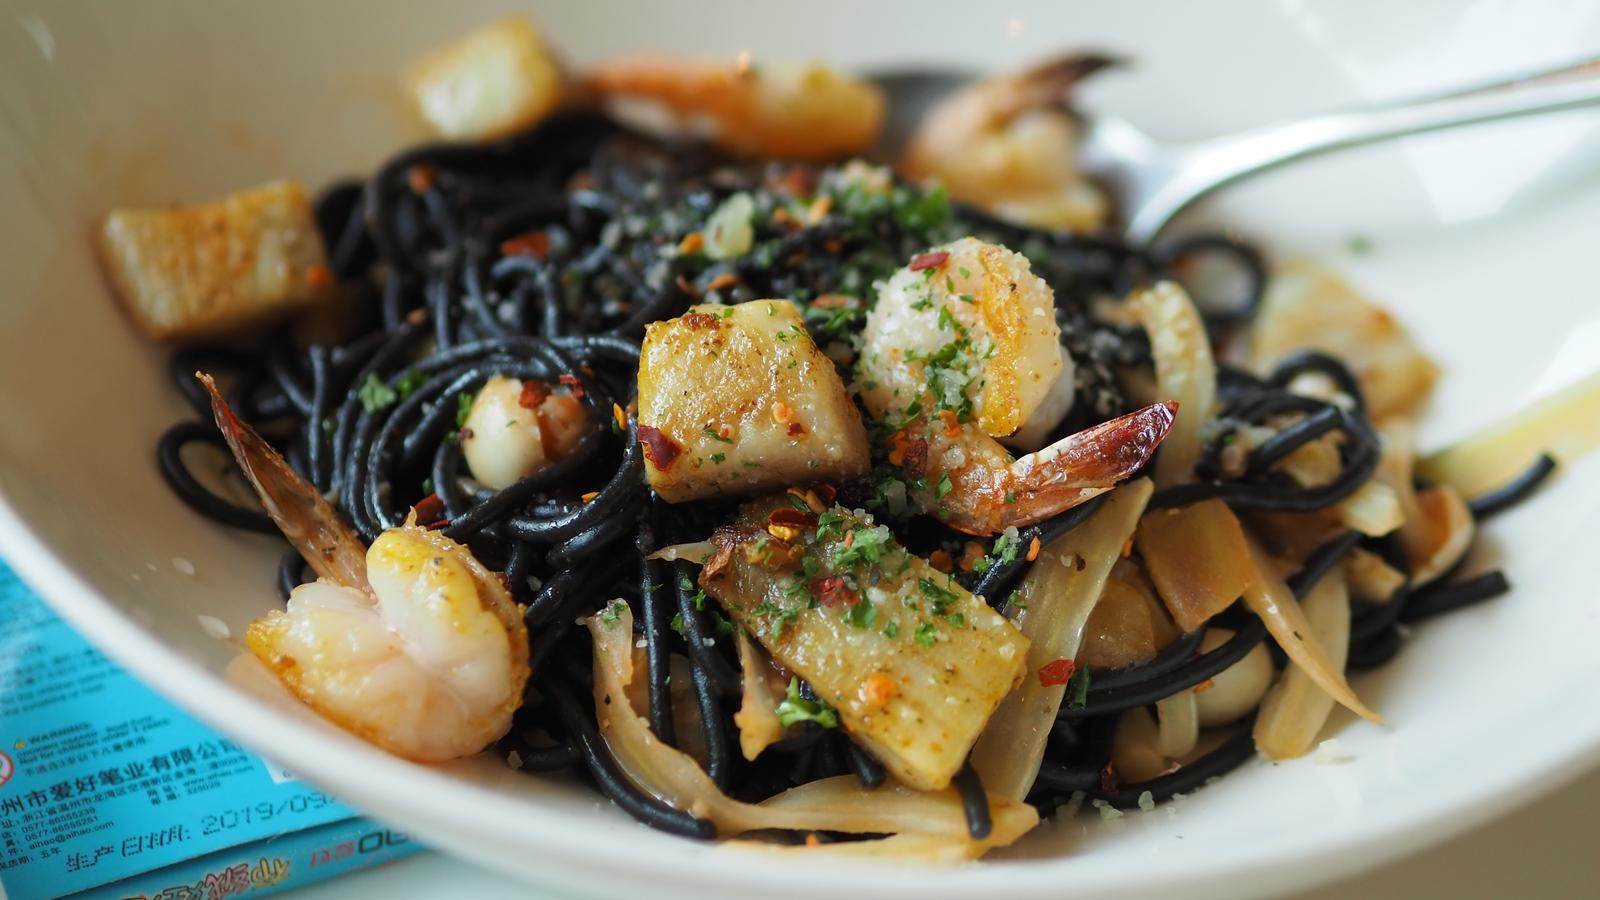 We’ll Guess What 🍁 Season You Were Born In, But You Have to Pick a Food in Every 🌈 Color First Squid ink pasta